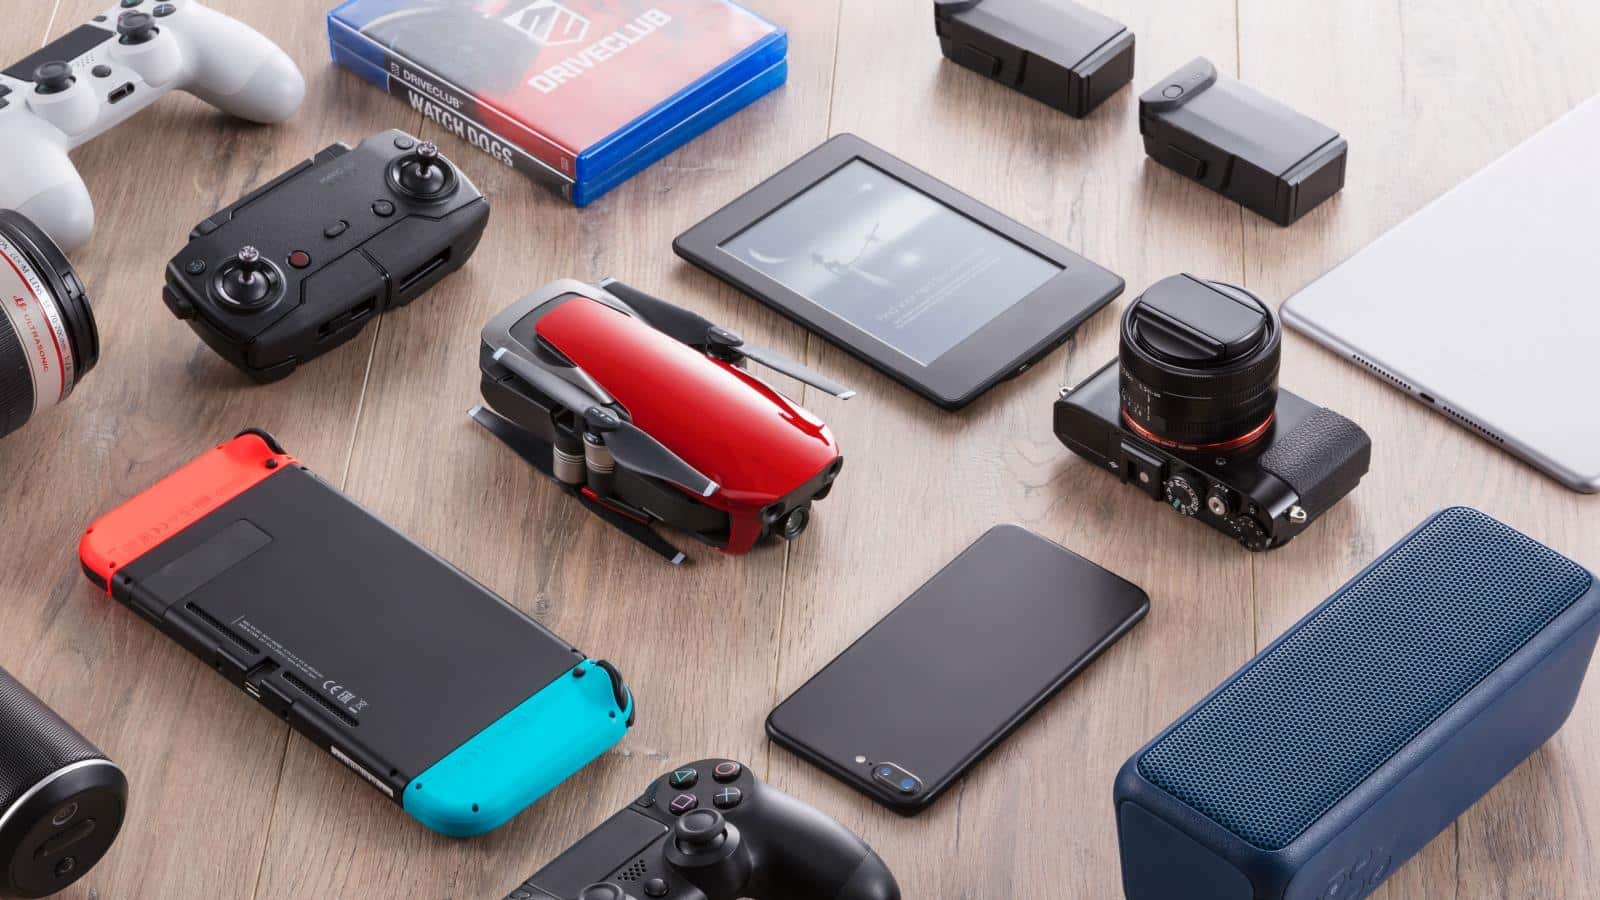 10 Must-Have Gadgets That Will Make Your Life Easier